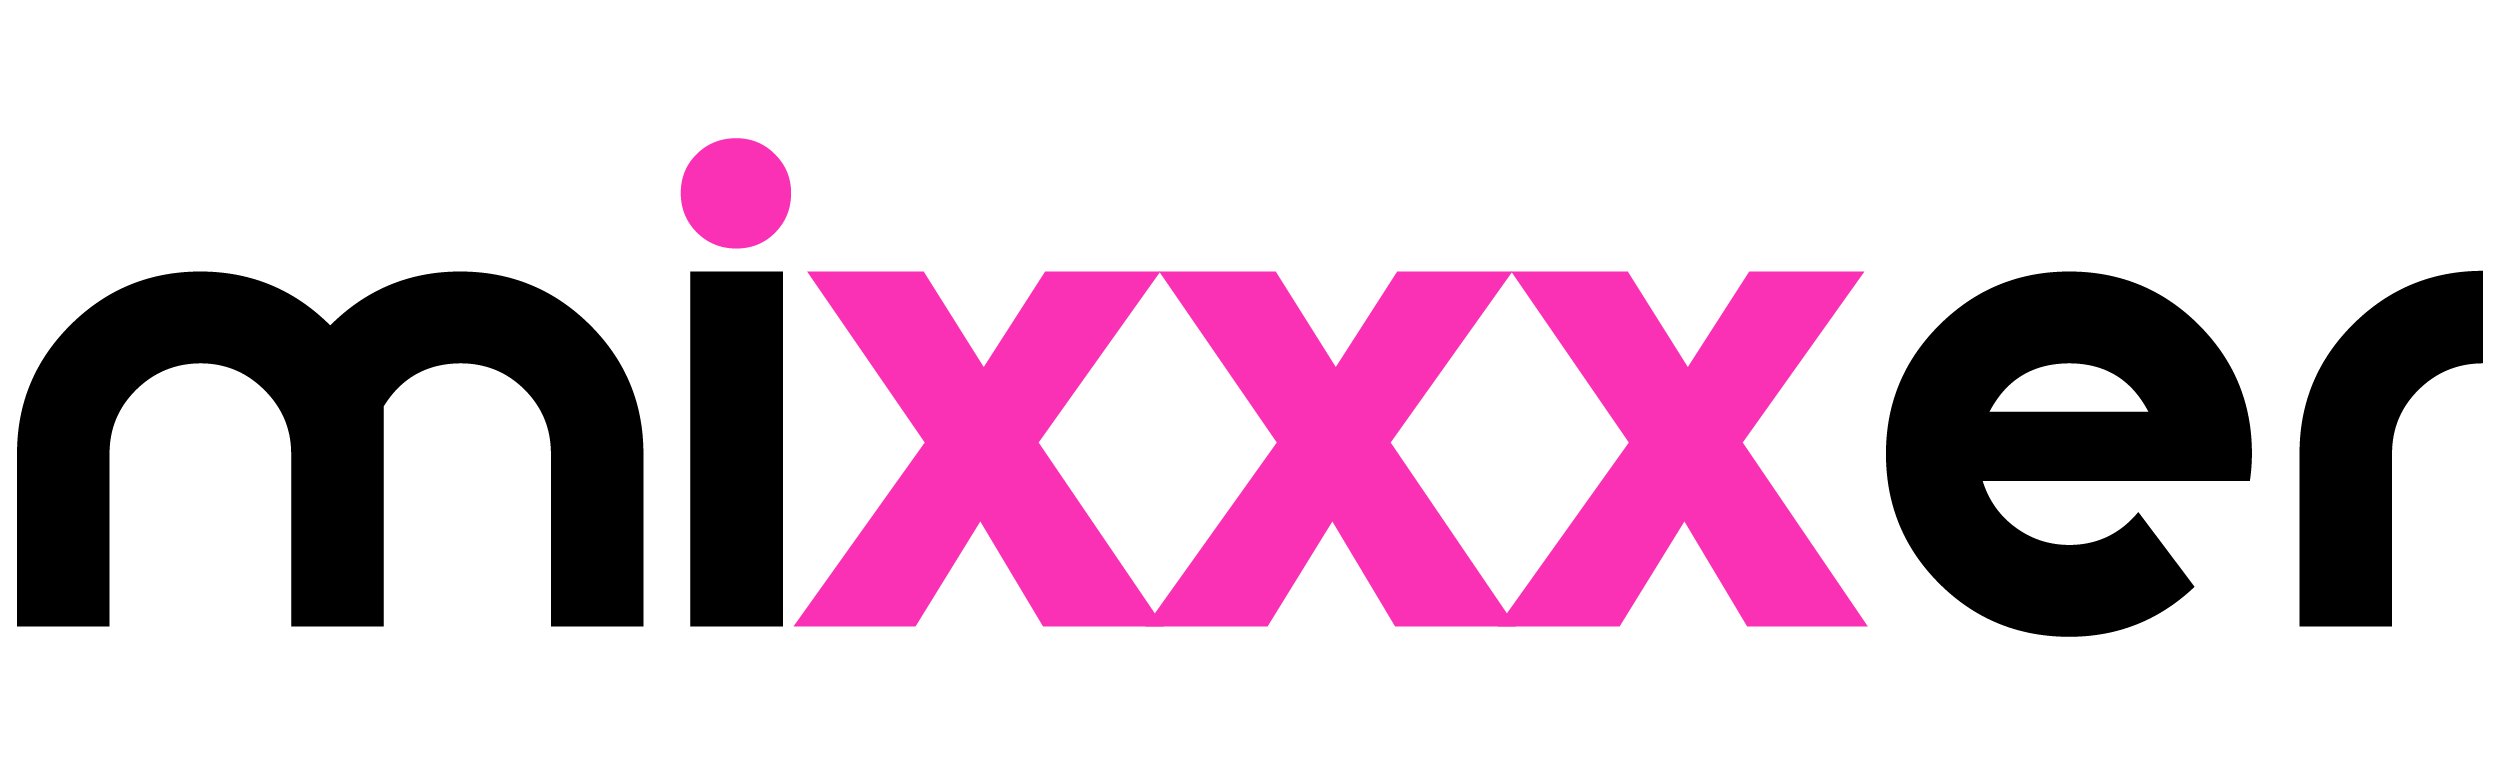 Mixxxer Review September 2021 Sexy Dates Or Just Scams